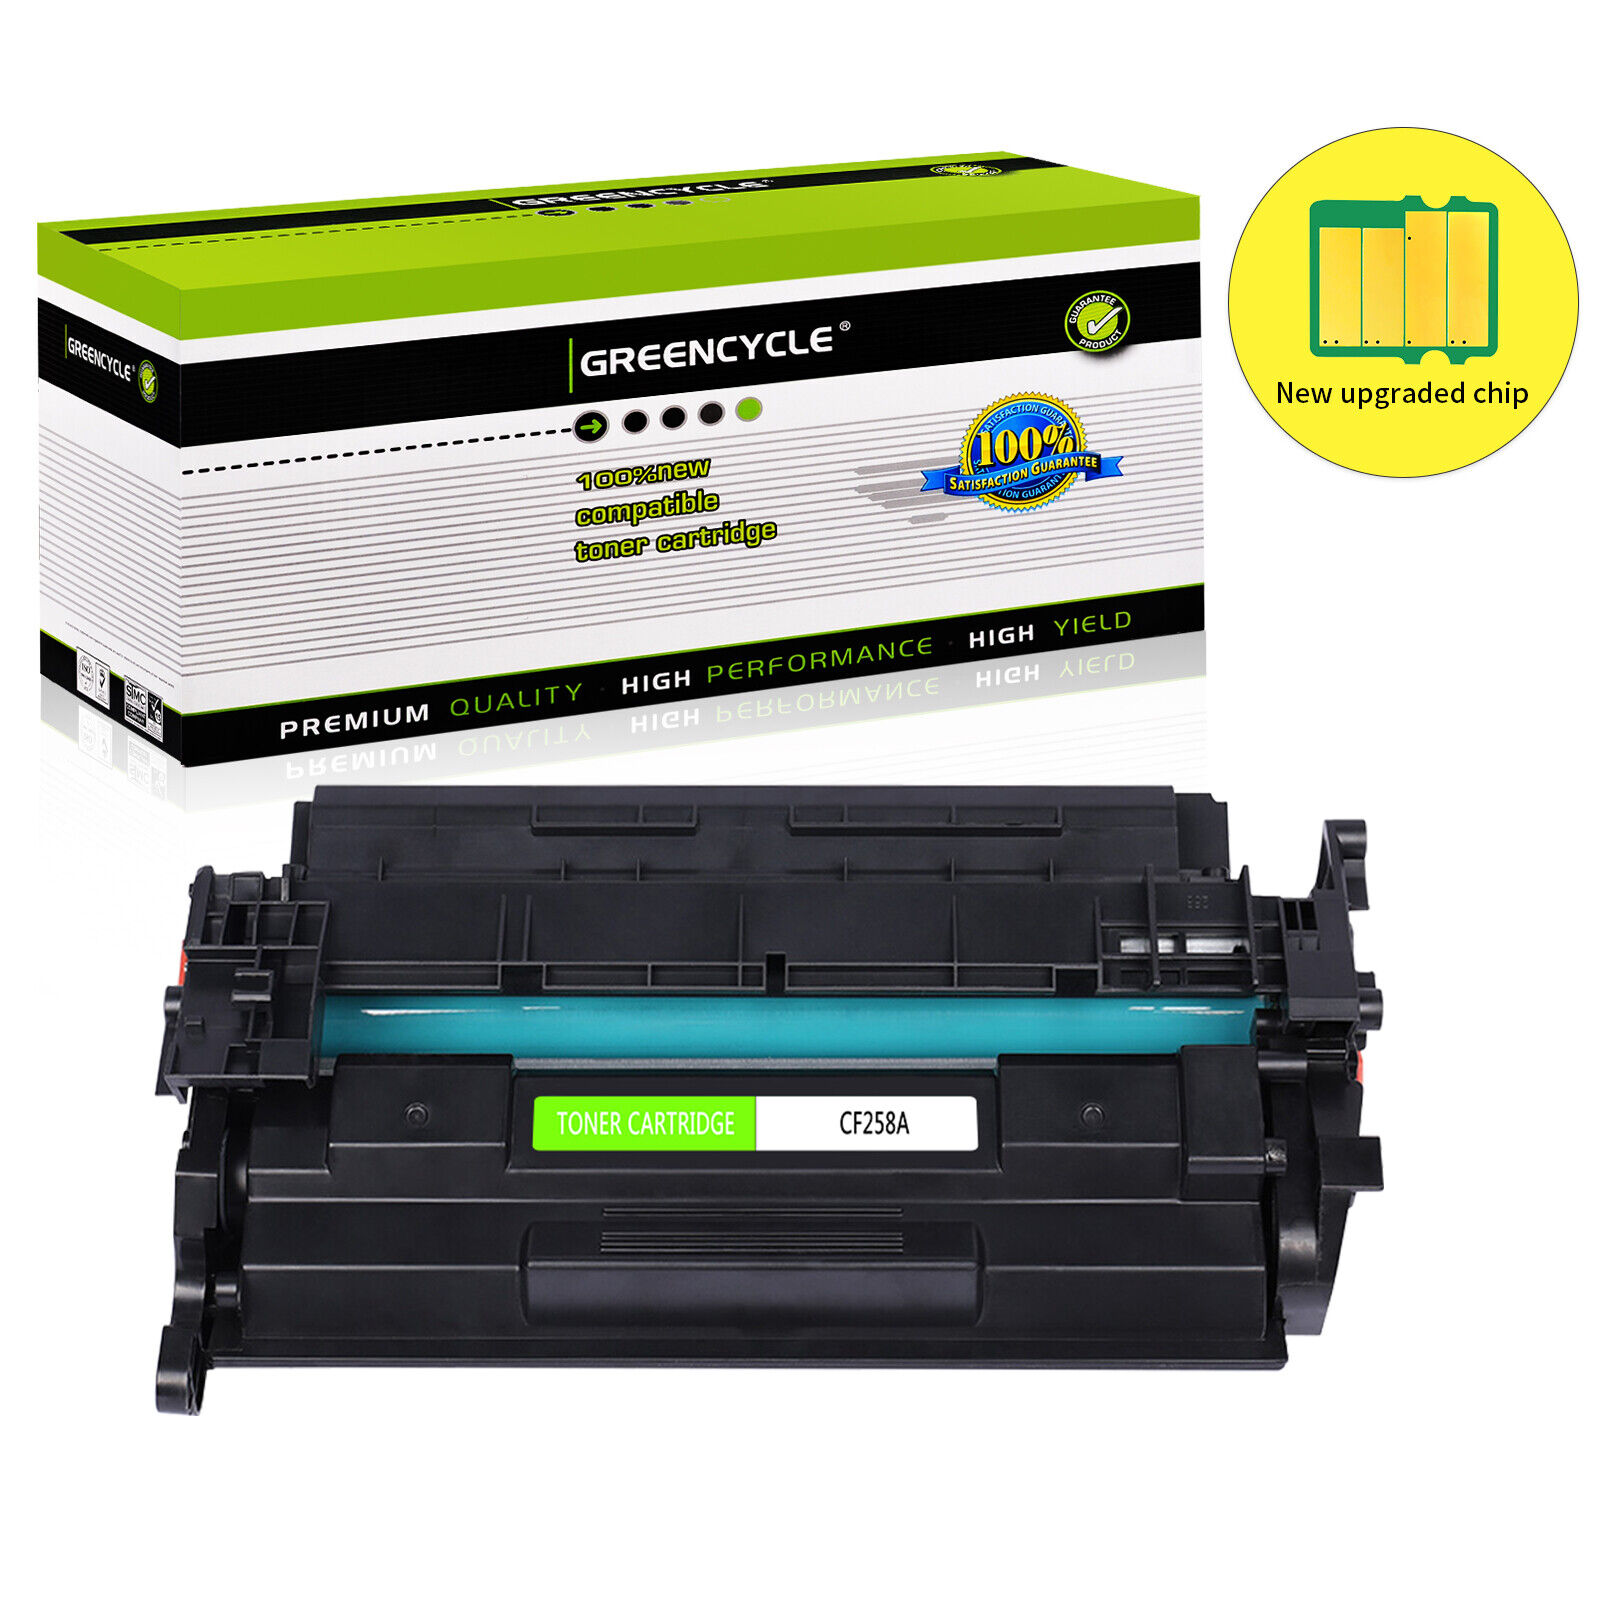 GREENCYCLE CF258A Toner for HP LaserJet Pro M404n M404dw MFP M428fdn with Chip